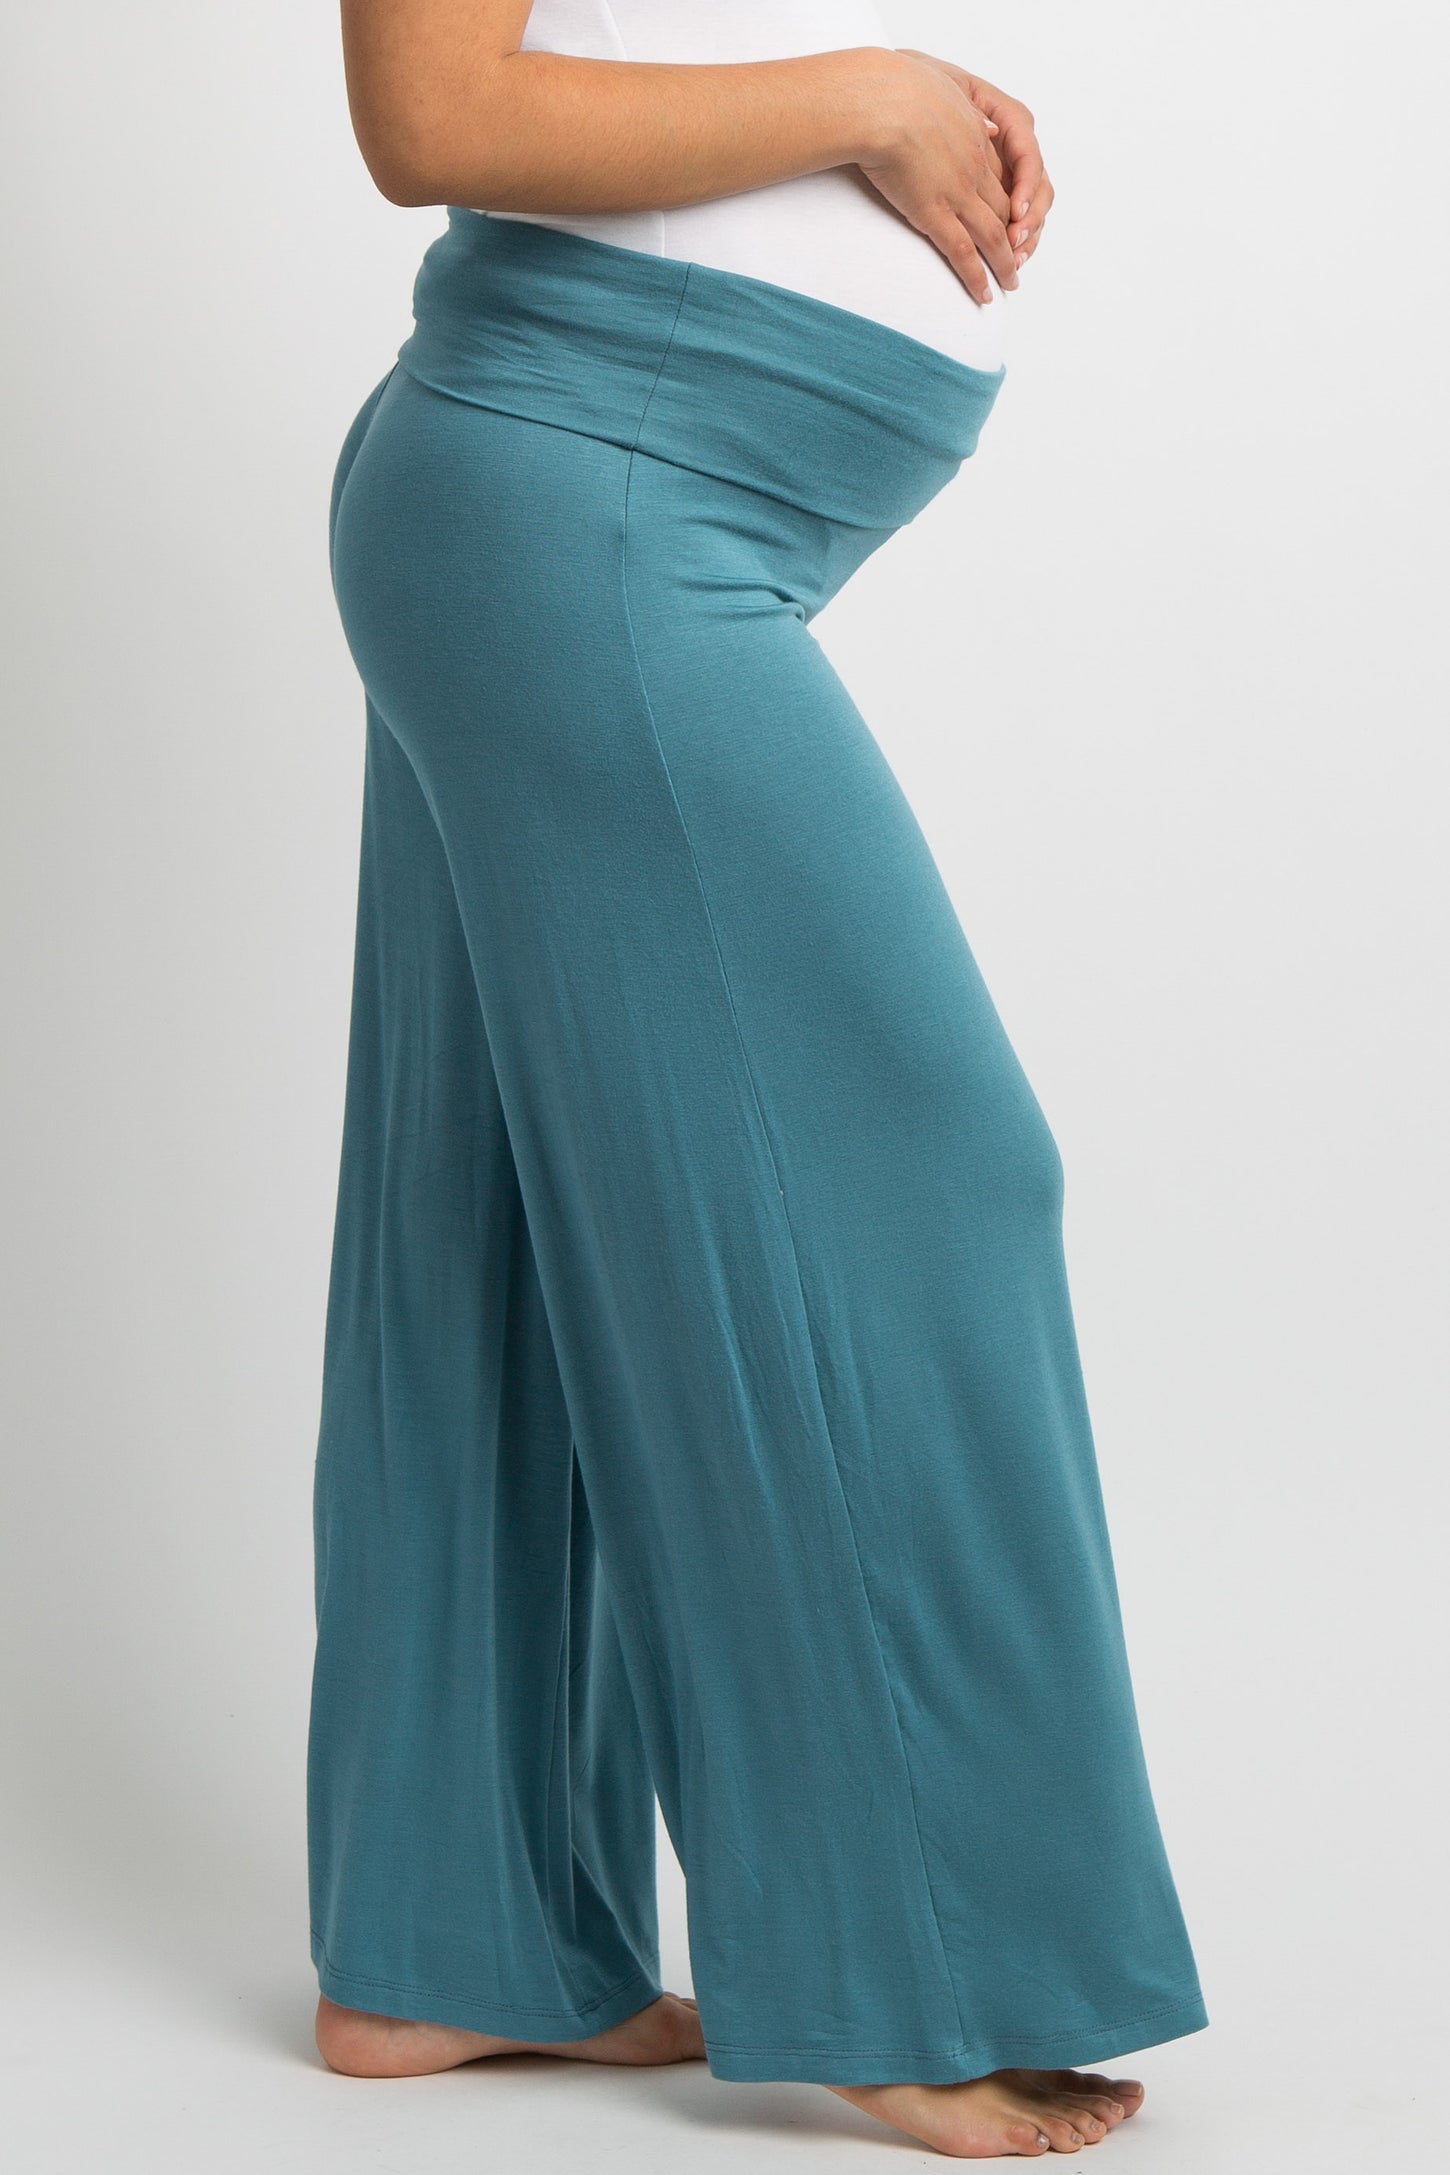 Teal Solid Wide Leg Maternity Lounge Pants